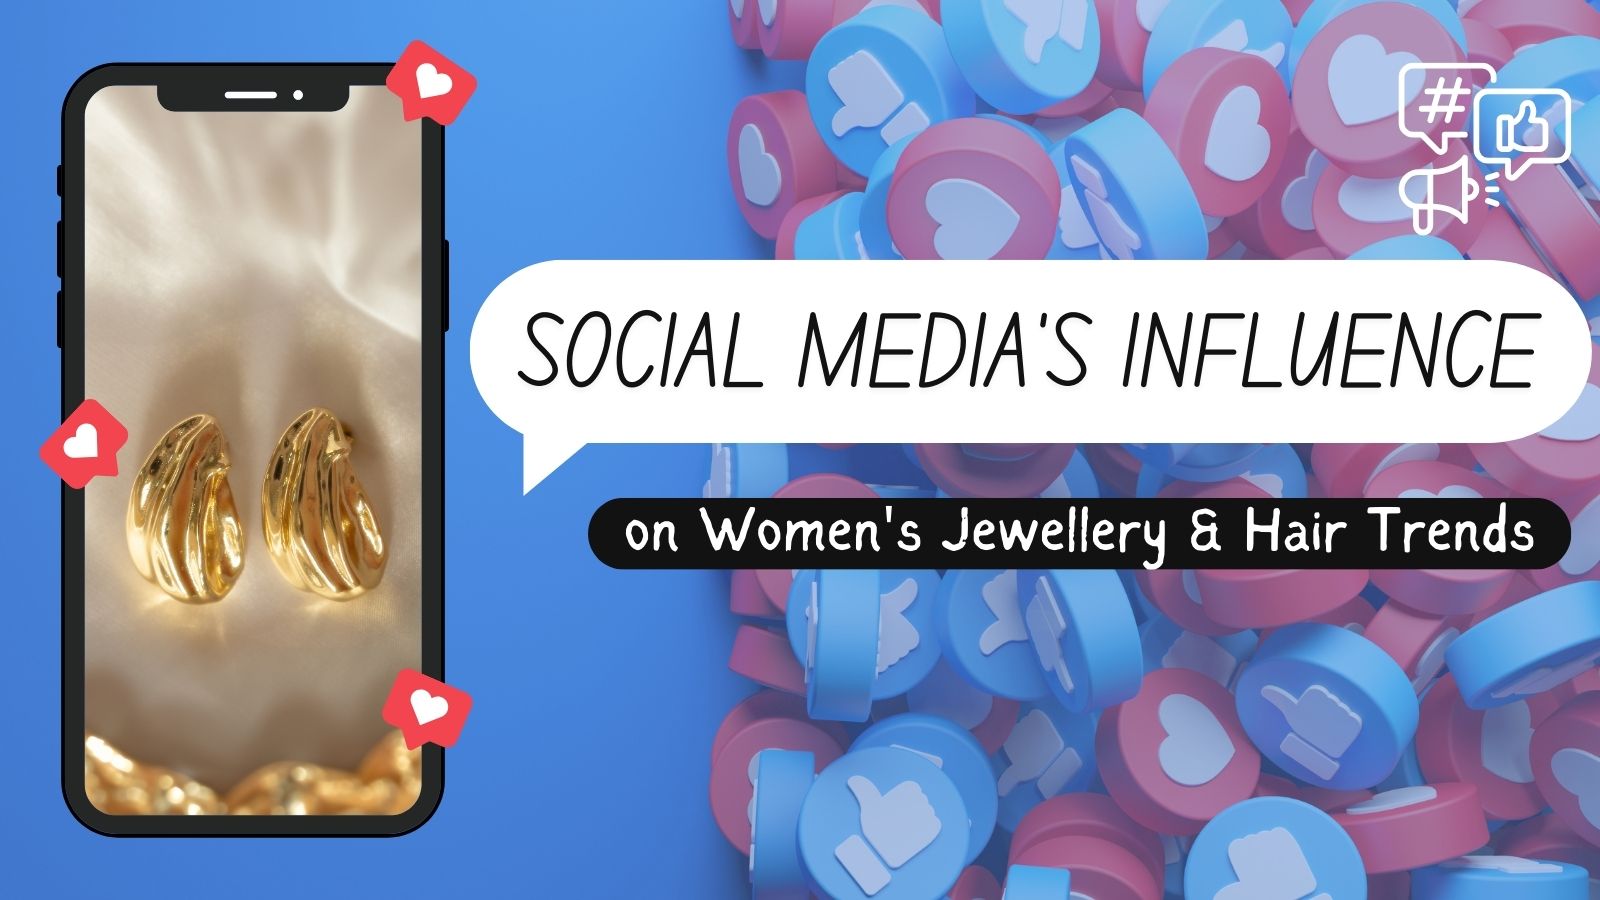 The impact of social media on women's jewellery and hair accessory trends